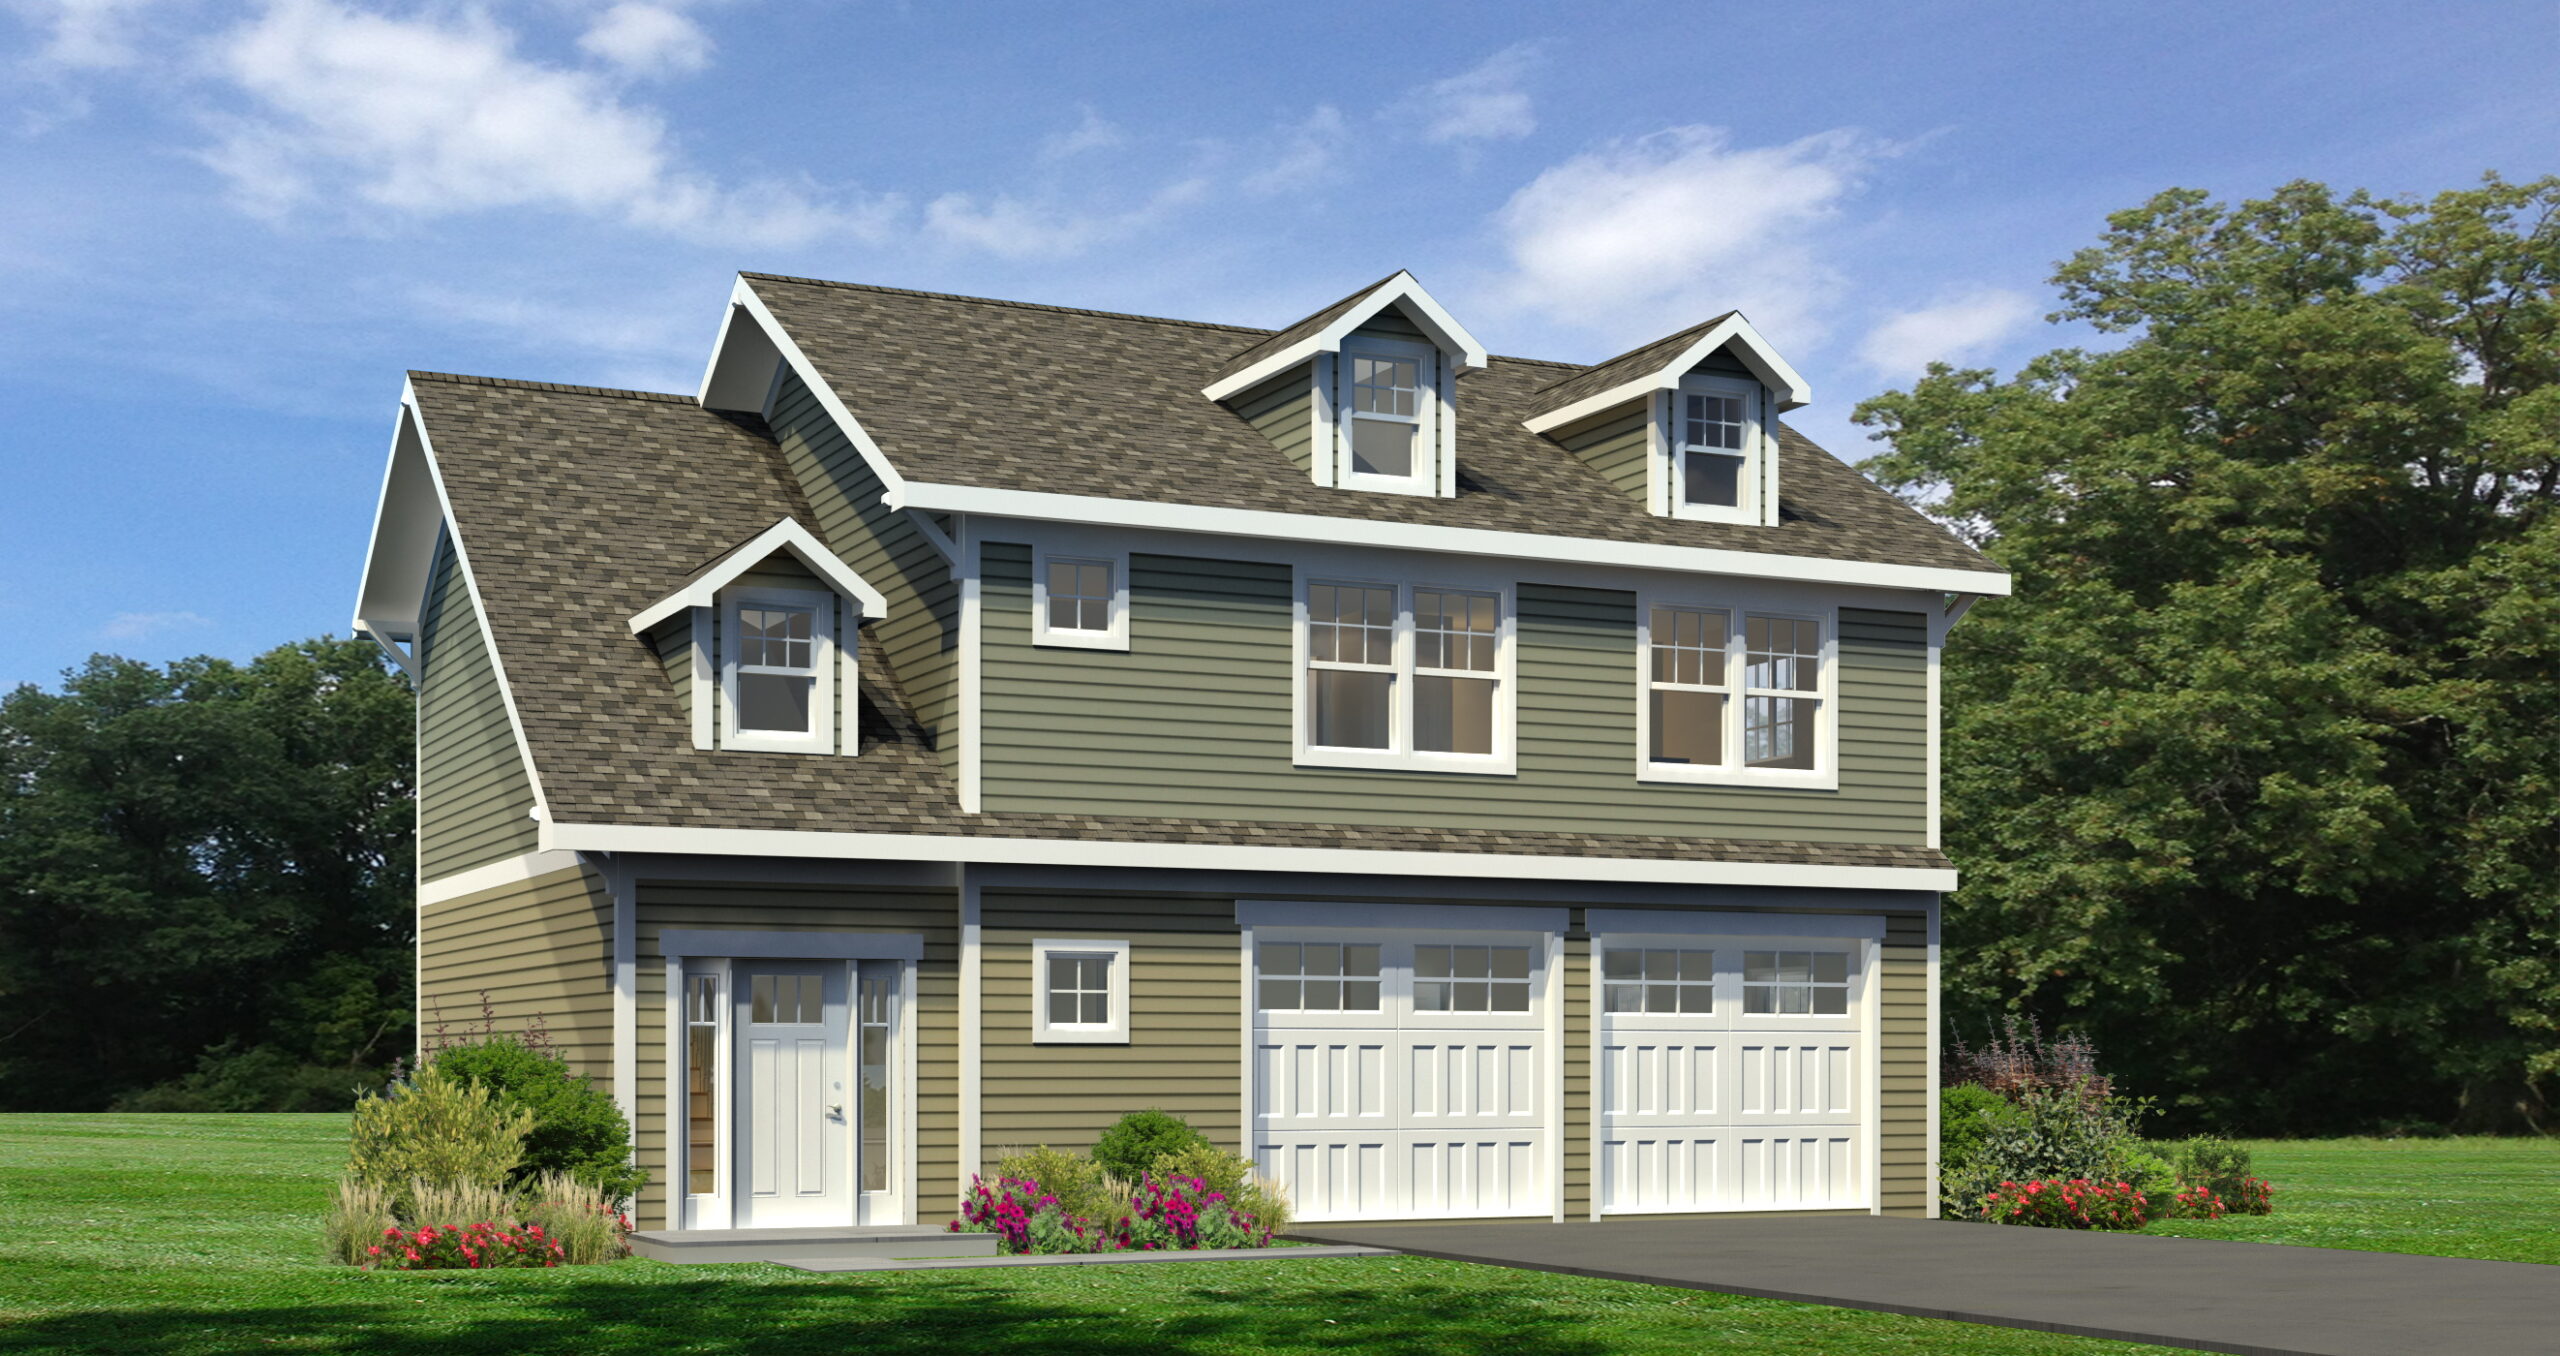 The Chesapeake Carriage Home by Westchester Modular Homes